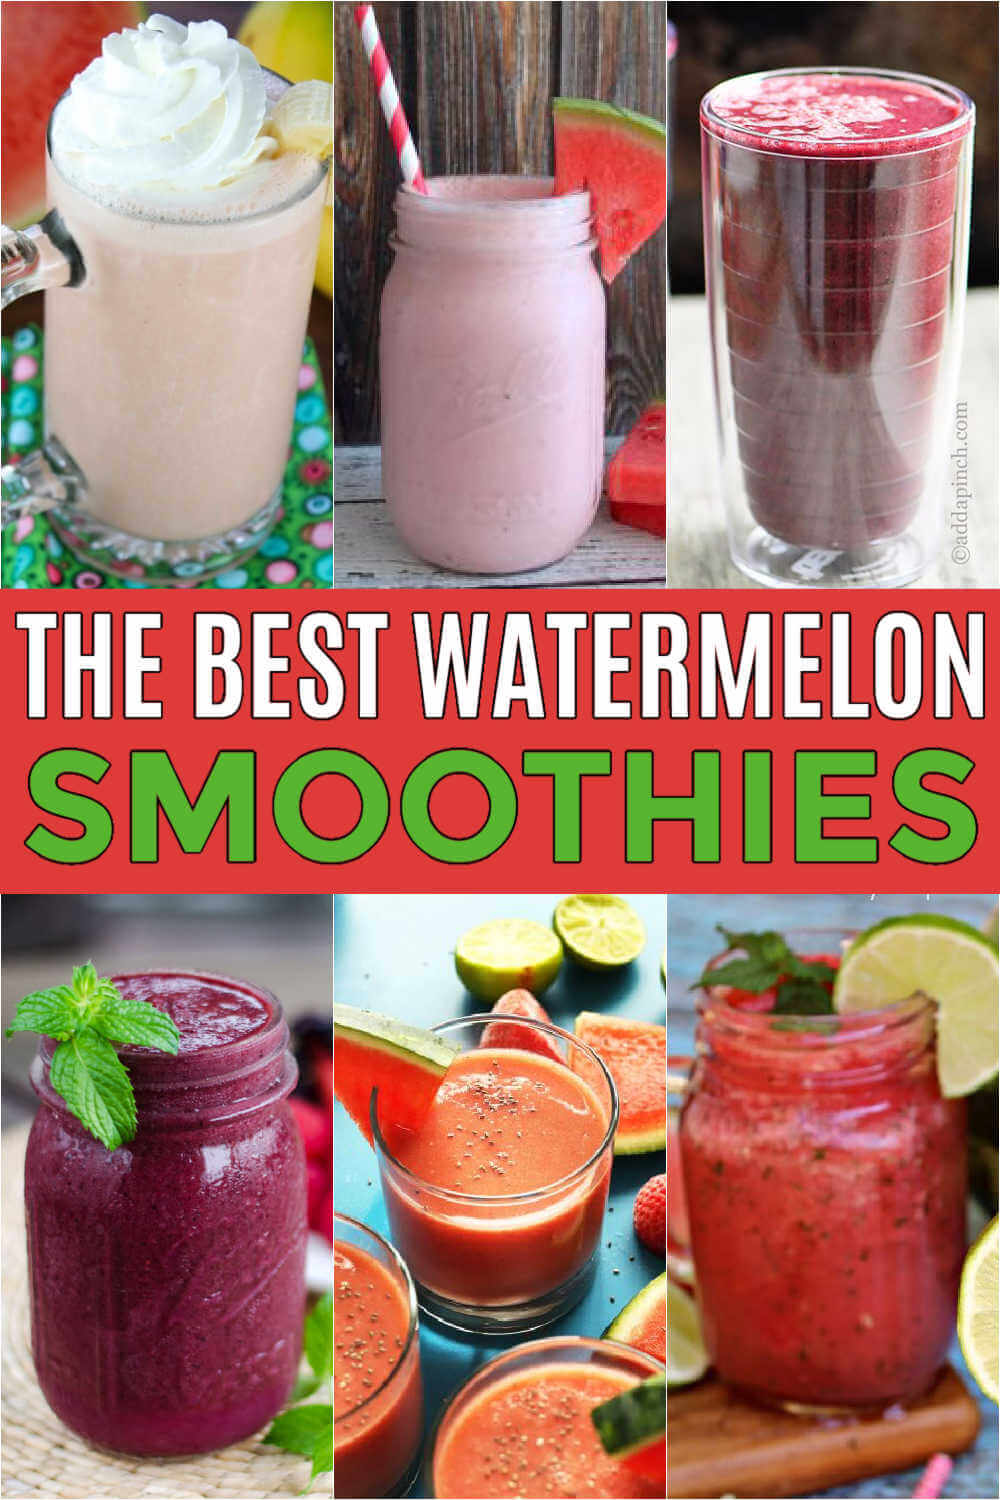 You are going to love these delicious and healthy watermelon smoothies are that are great for kids and for adults! These Healthy Smoothie Recipes are easy to make and great for weightloss too. You will love these smoothies with watermelon recipes! #eatingonadime #smoothierecipes #watermelonrecipes #healthyrecipes #drinkrecipes 